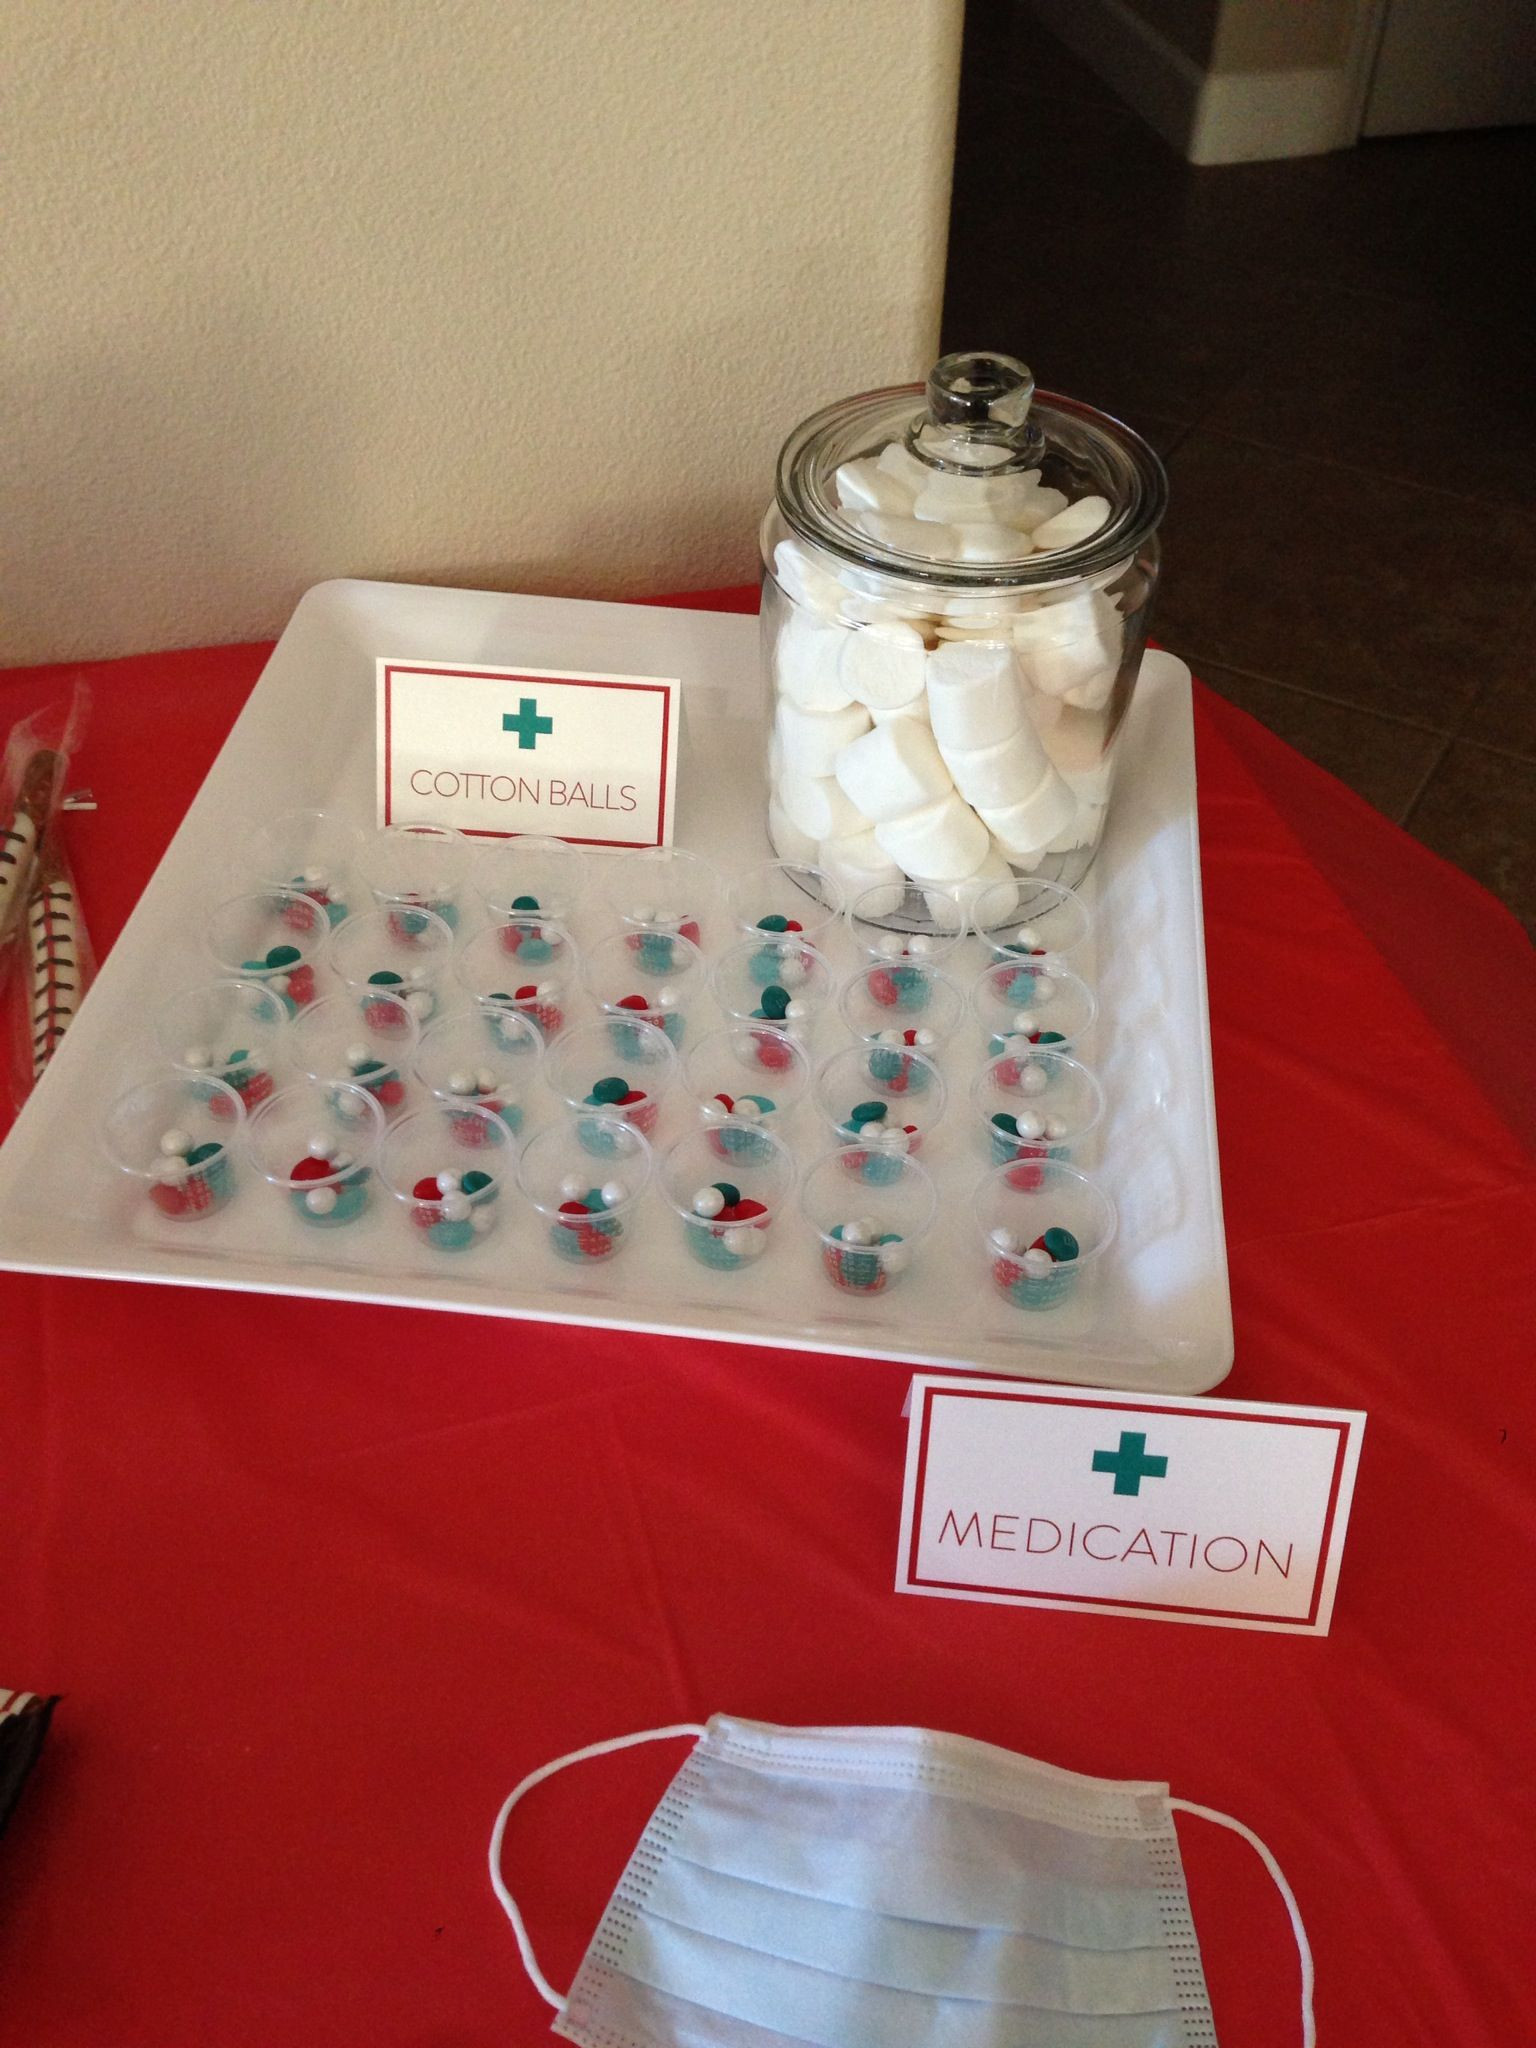 Graduation Party Ideas For Nurses
 Candy "Medication Cups" and Marshmallow "Cotton Balls" at